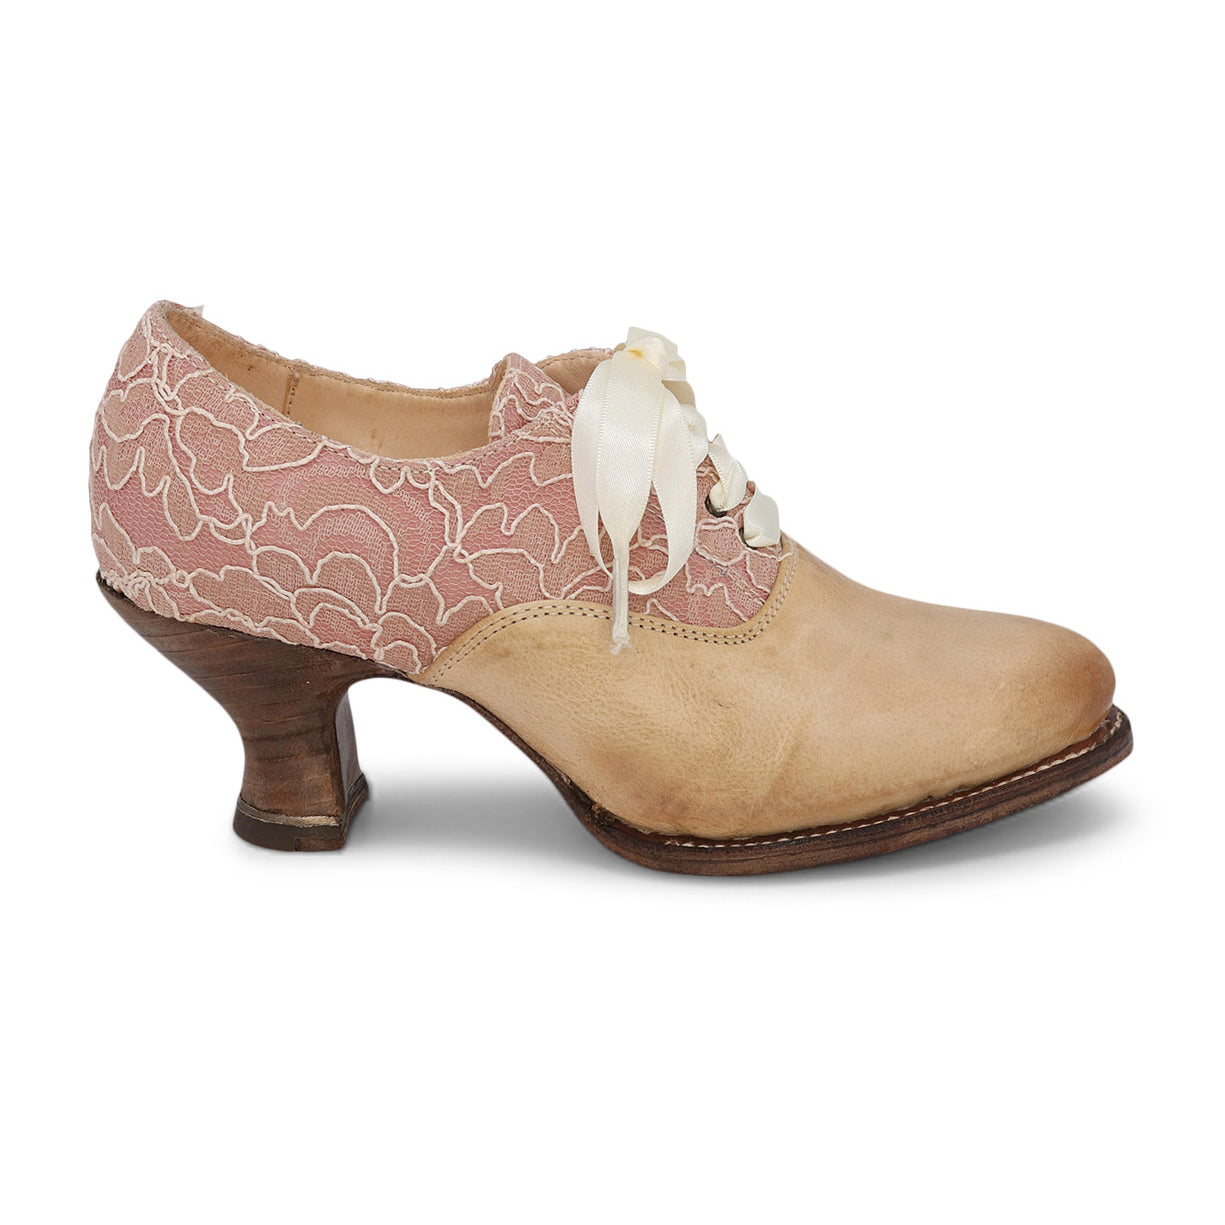 A women's lace-up leather shoe with a pink and white spooled heel, named Janet by Oak Tree Farms.